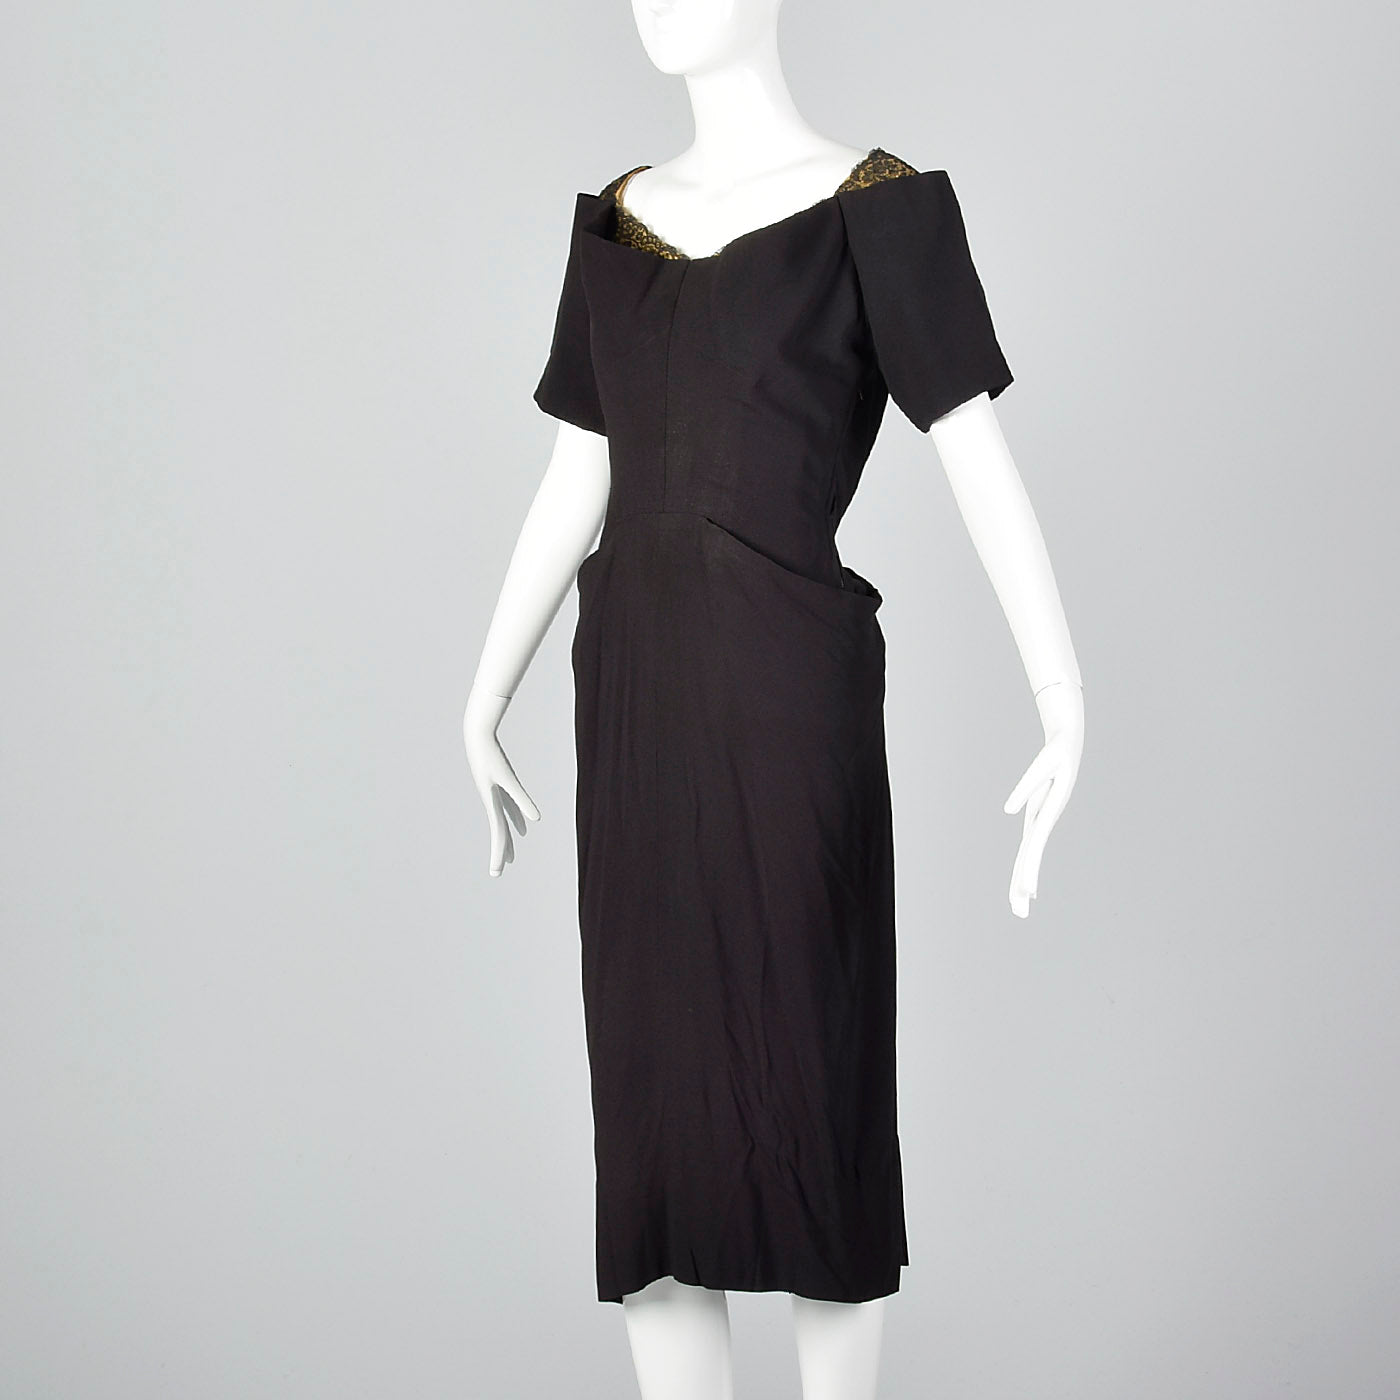 1940s Black Rayon Dress with Gold Trim